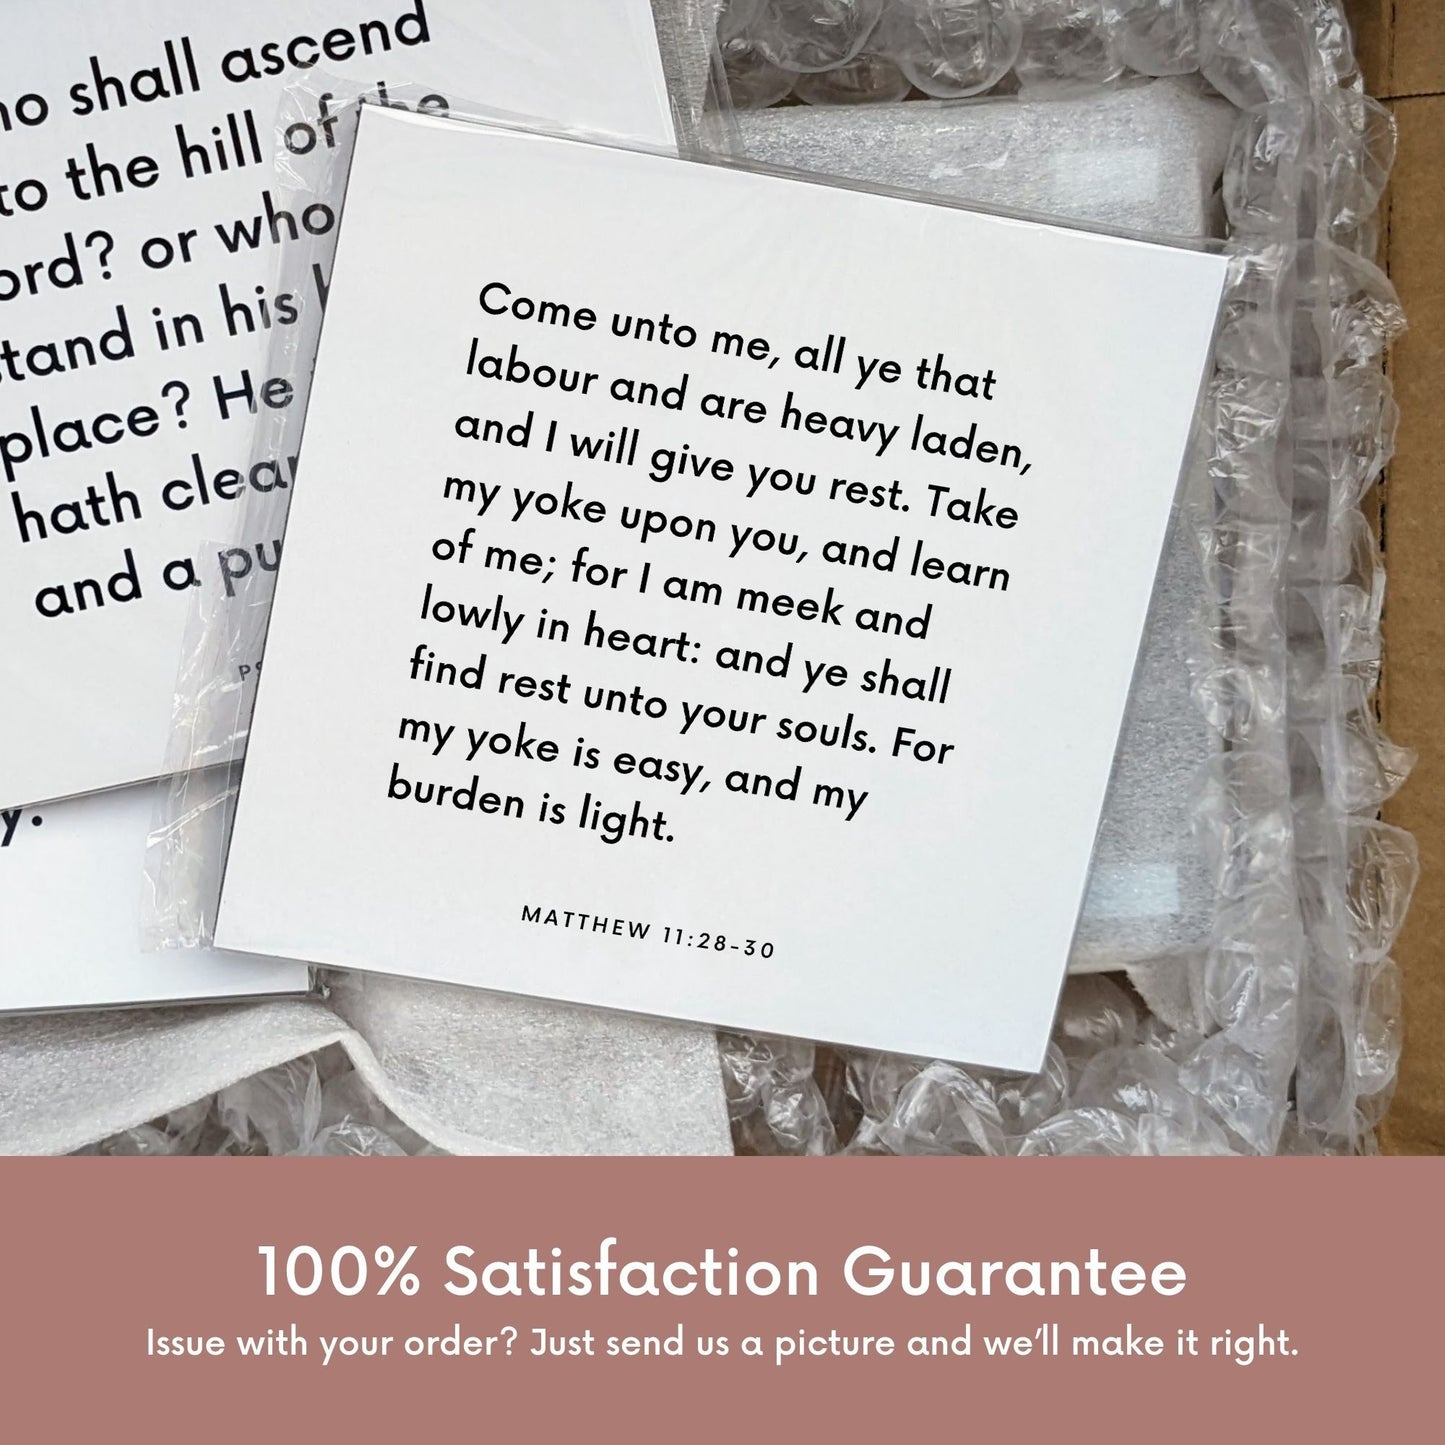 Shipping materials for scripture tile of Matthew 11:28-30 - "Come unto me, all ye that labour and are heavy laden"